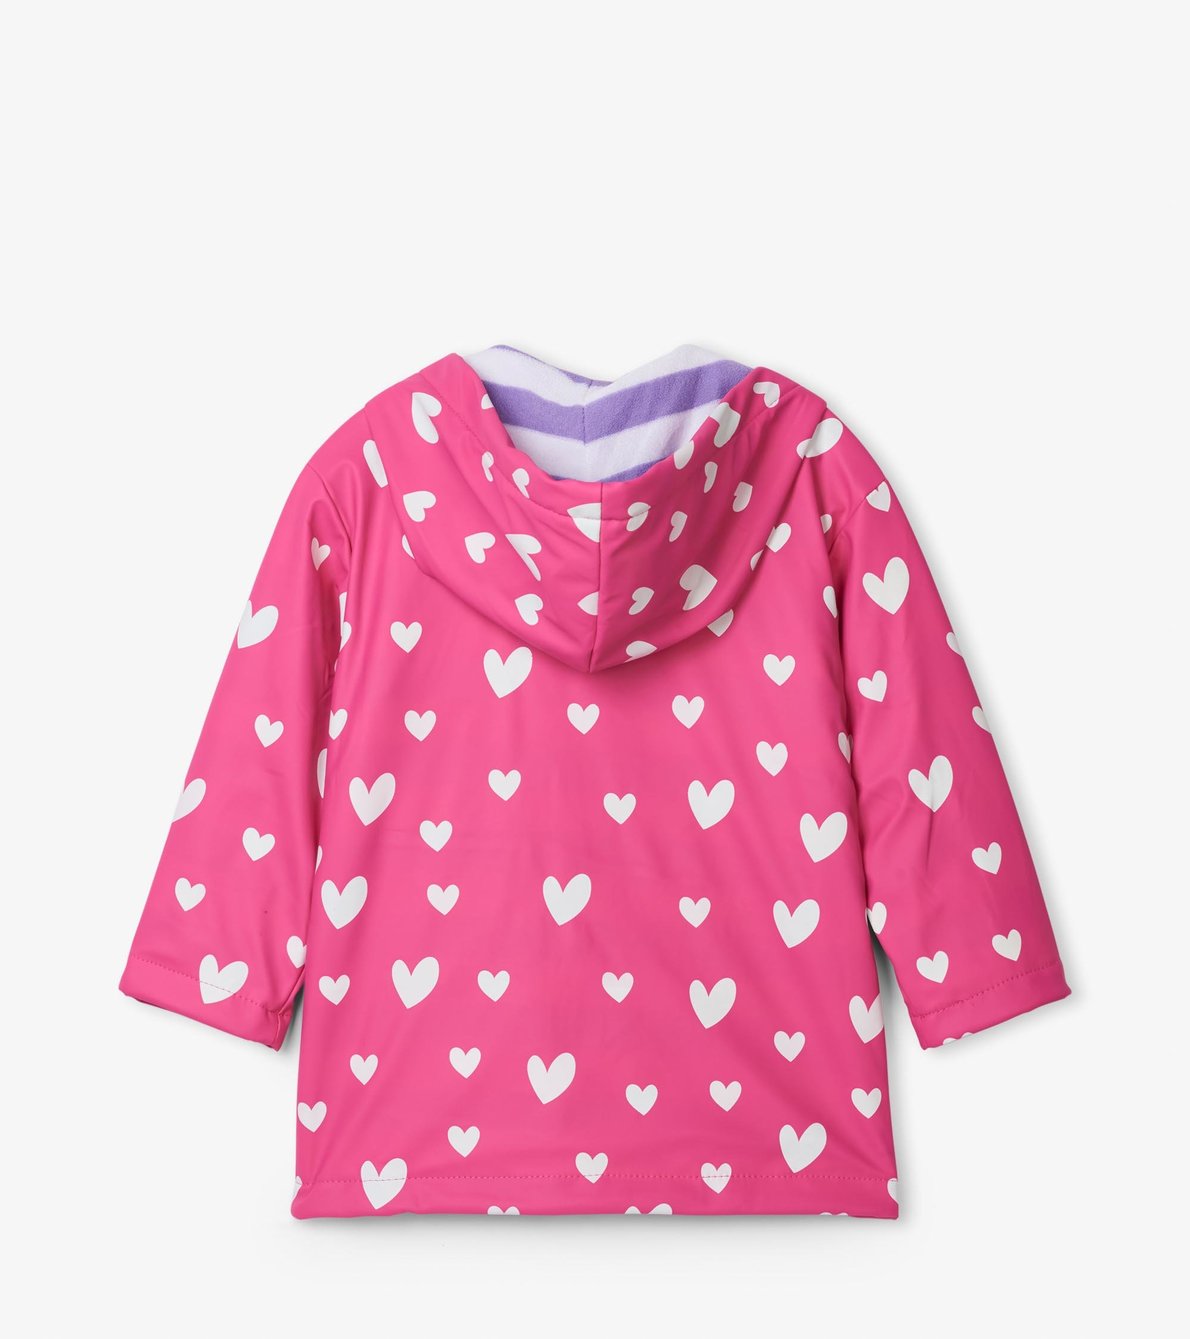 View larger image of Colour Changing Sweethearts Raincoat